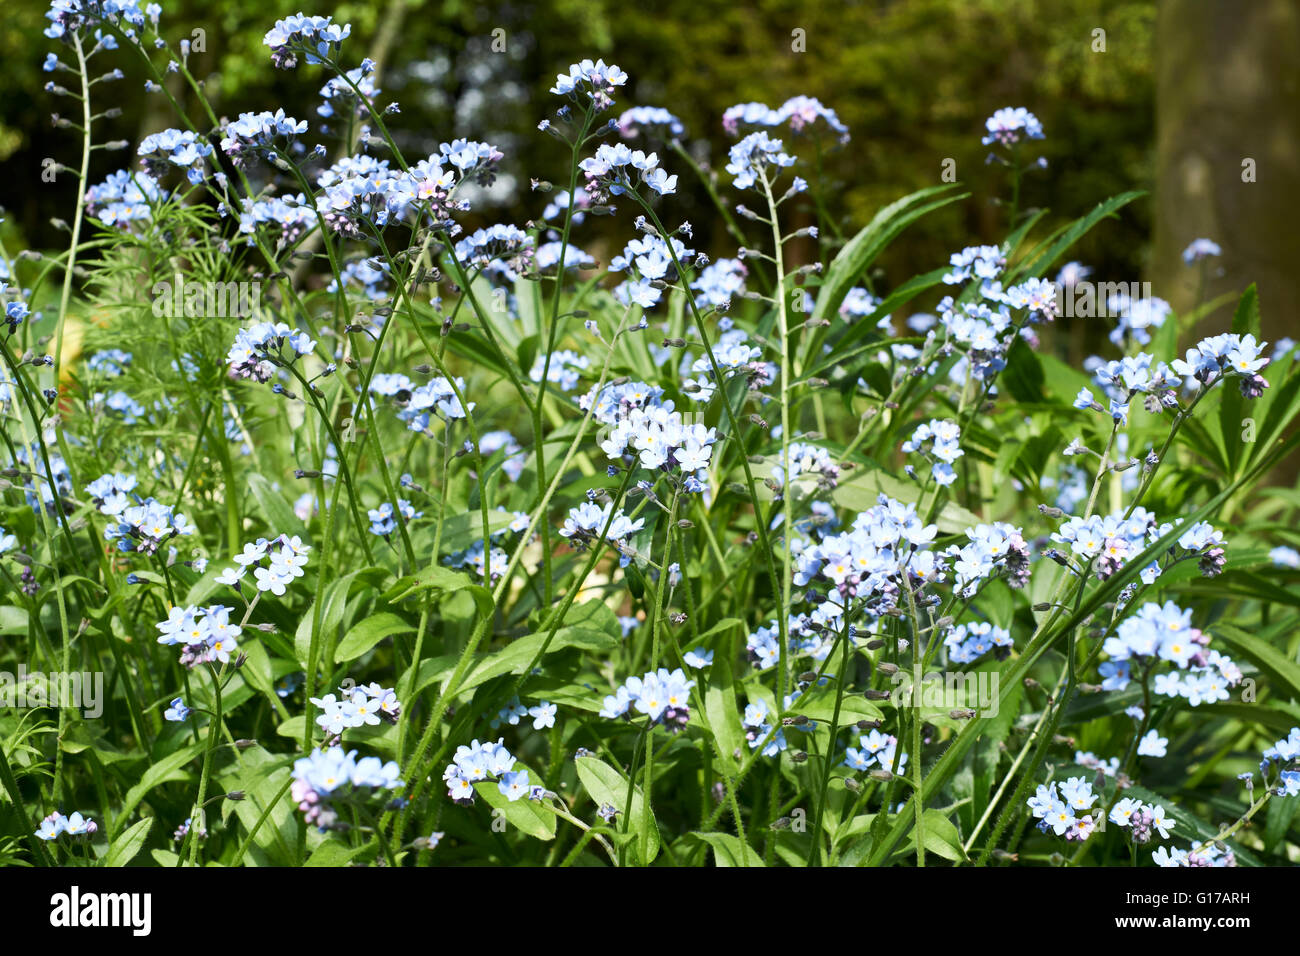 An English Country Garden flowerbed densely planted with Forget-me-not (Myosotis). Spring. UK Stock Photo